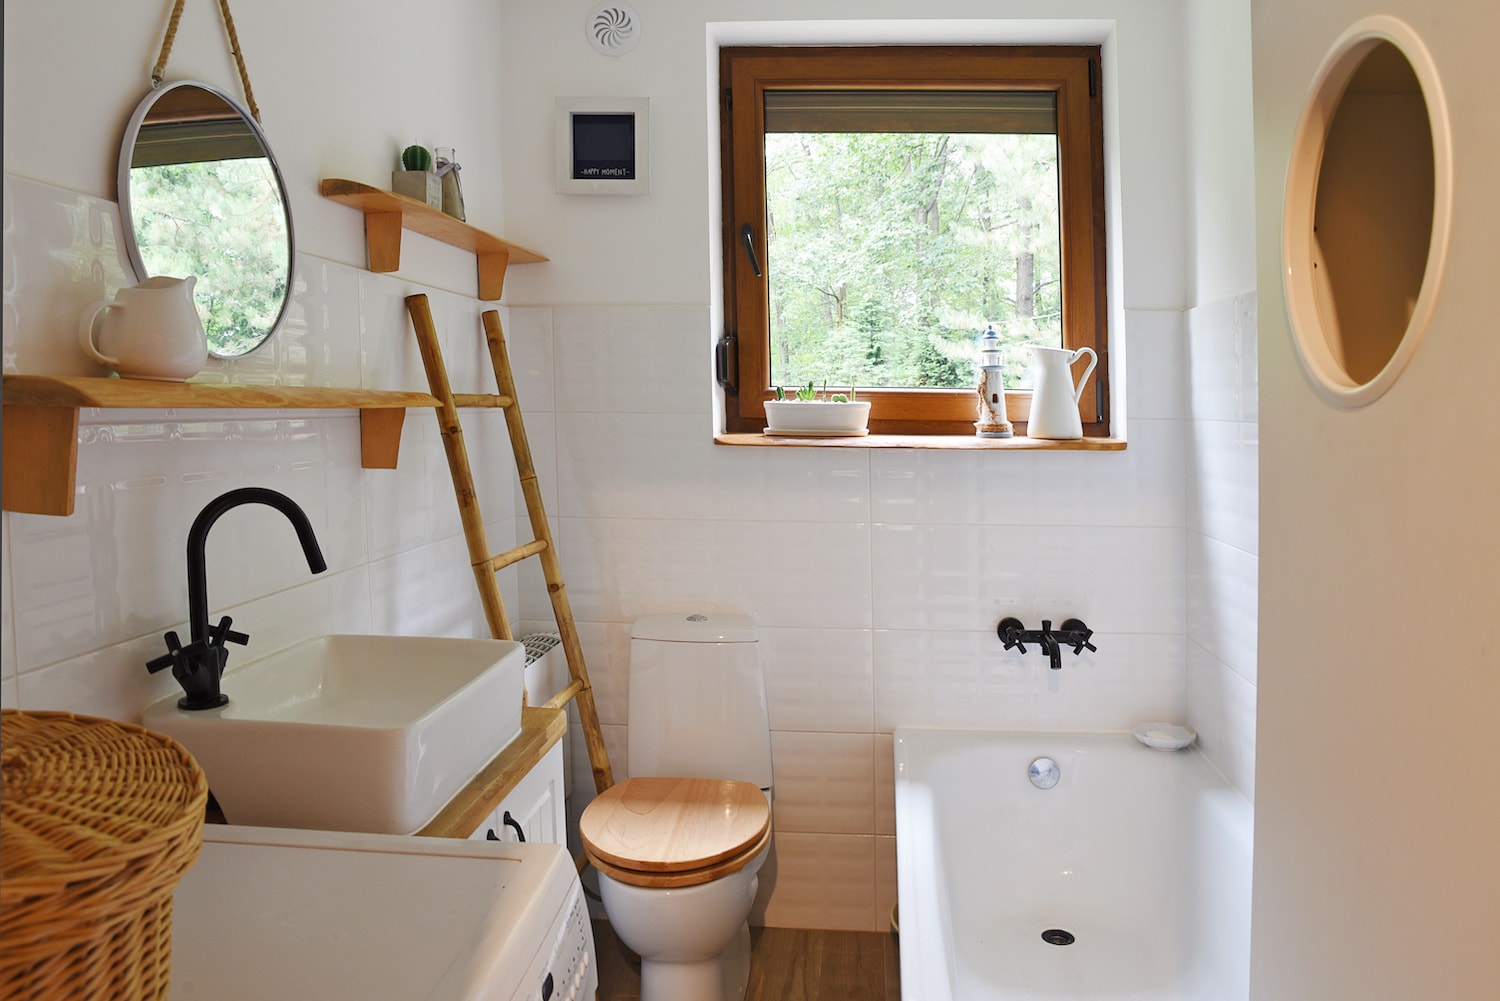 budget small bathroom remodel finished bathroom renovation with warm wood tones and white tile and fixtures